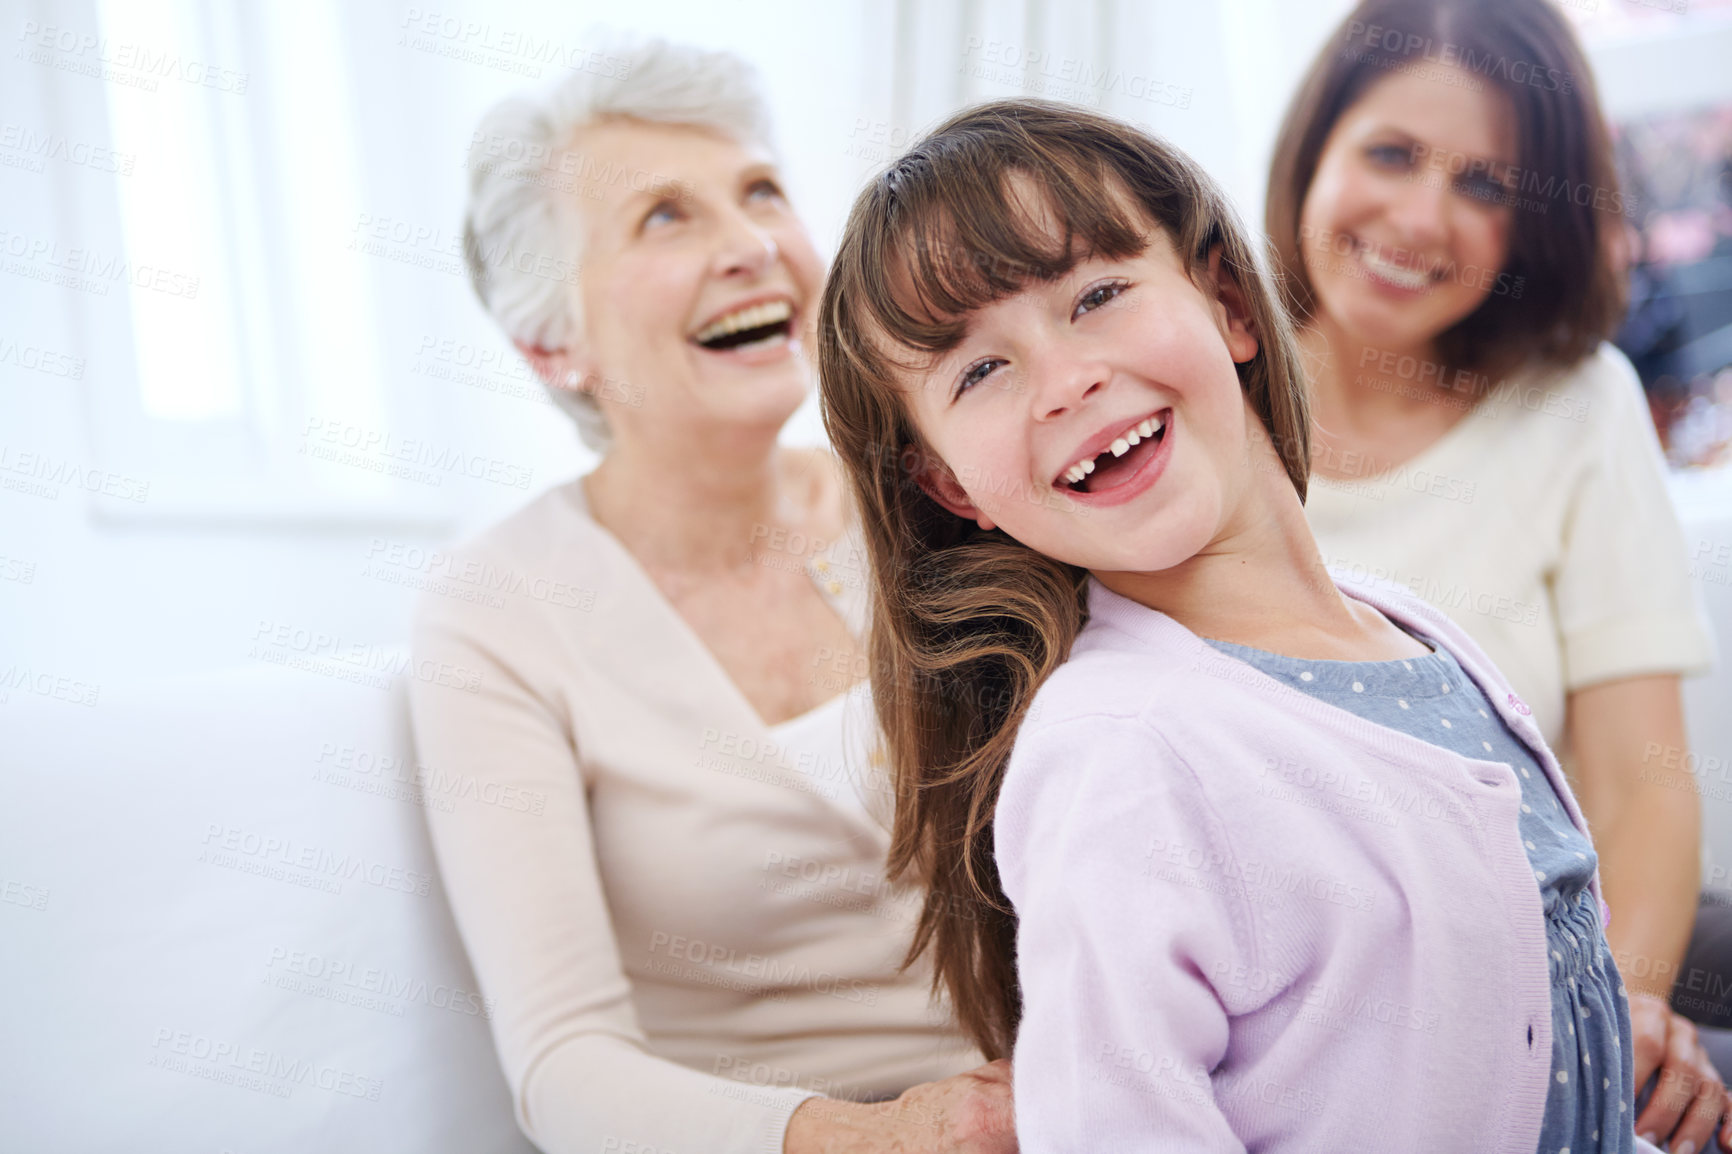 Buy stock photo Portrait of an adorable little girl with her mother and grandmother in the background